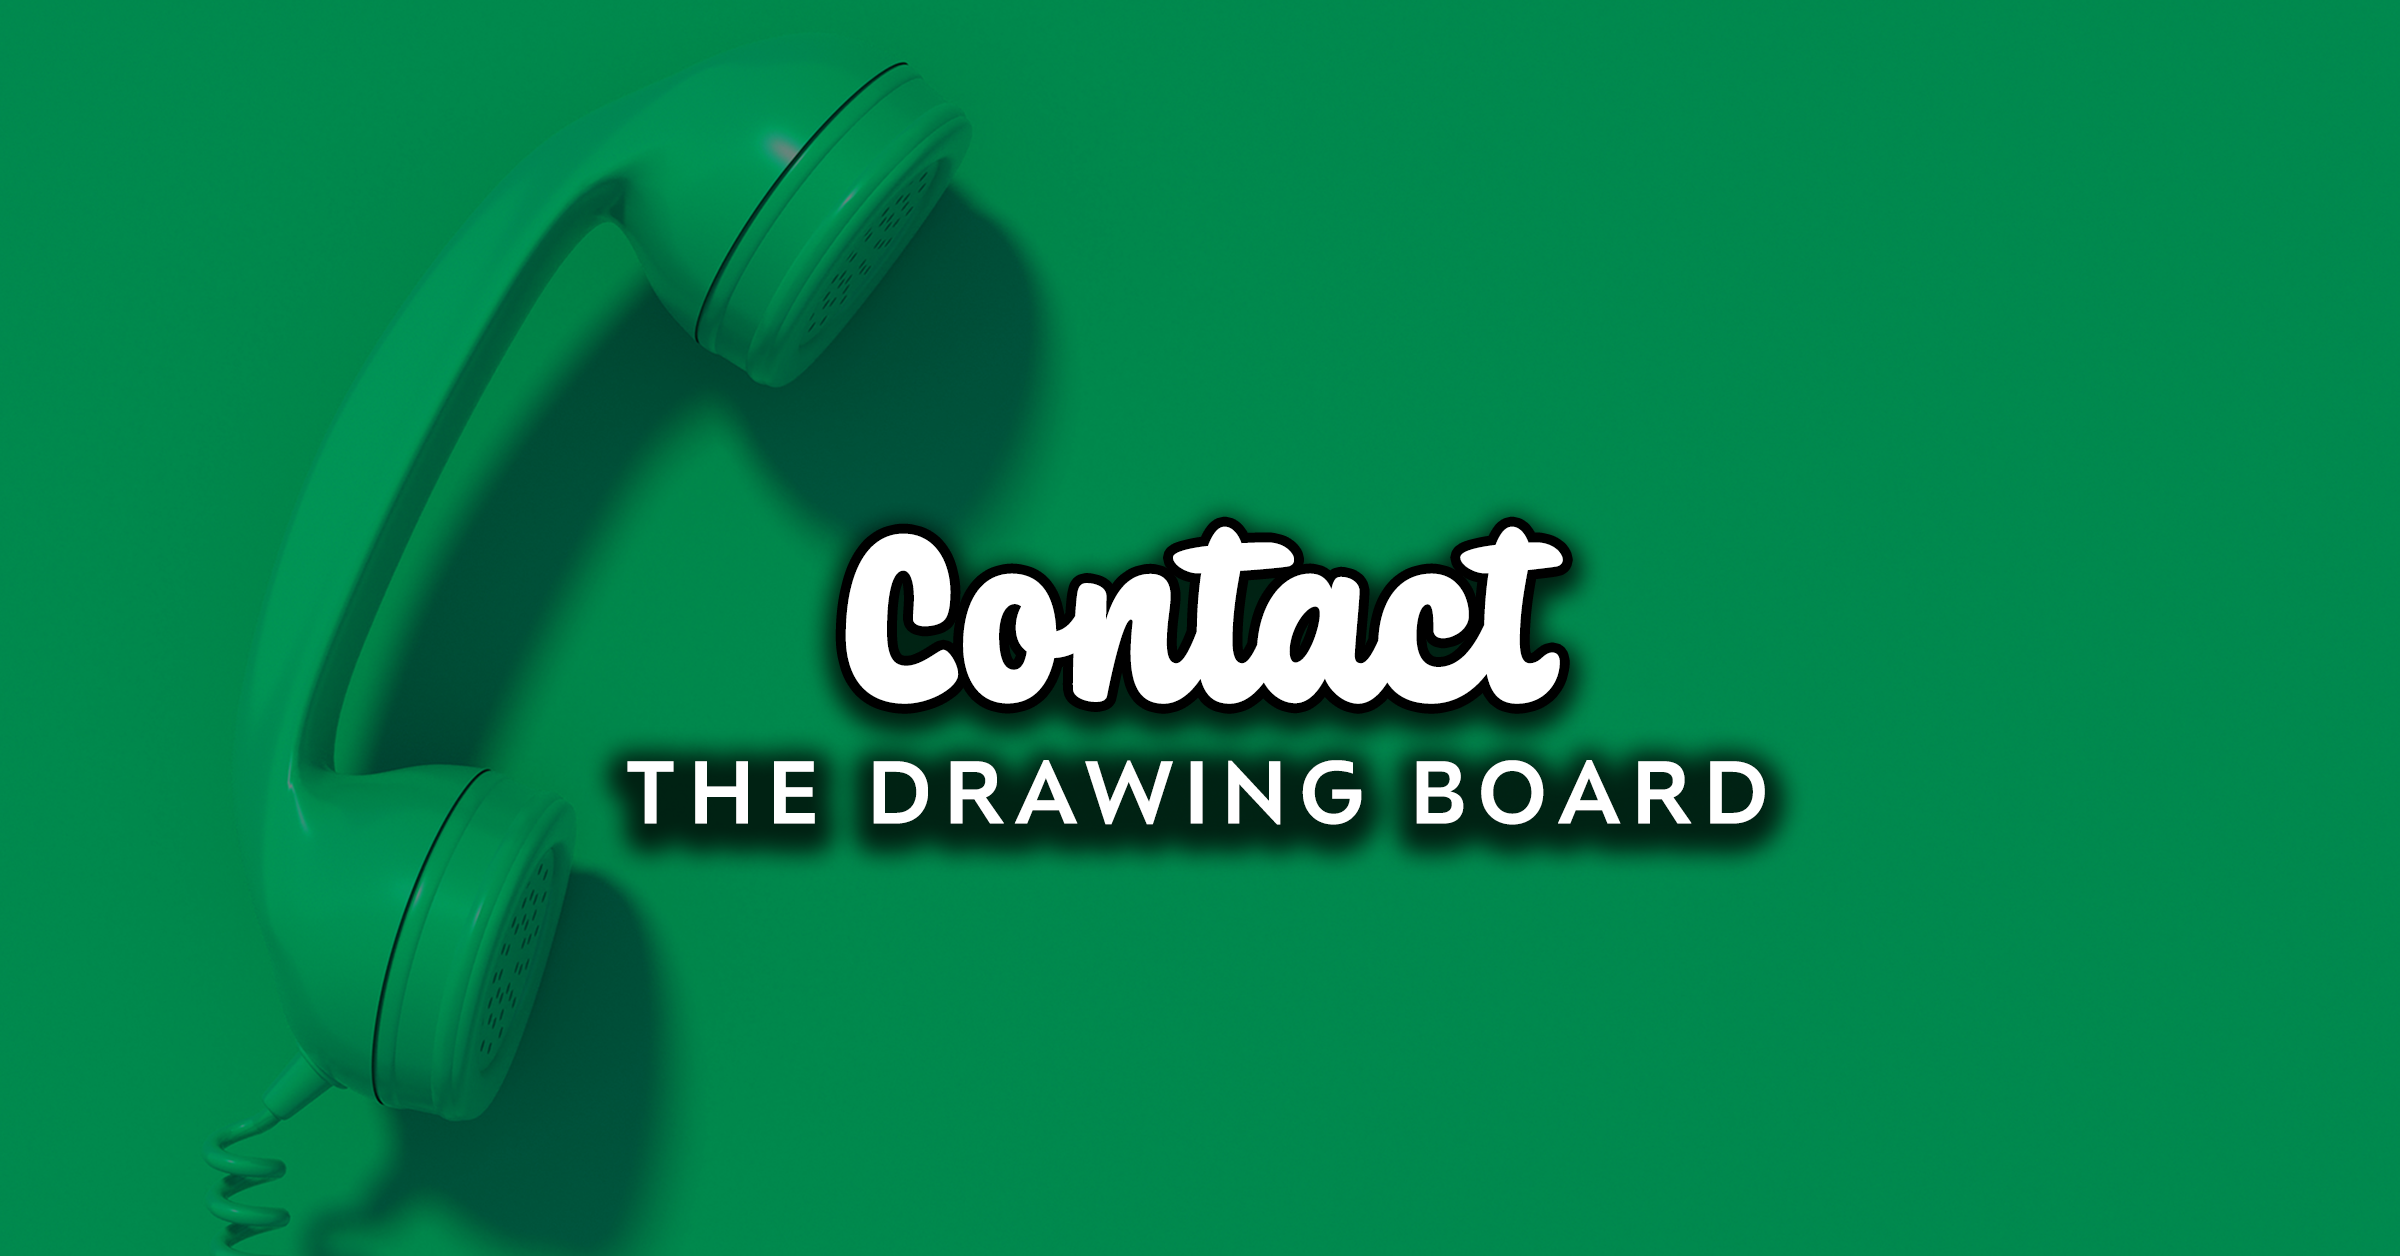 Contact The Drawing Board